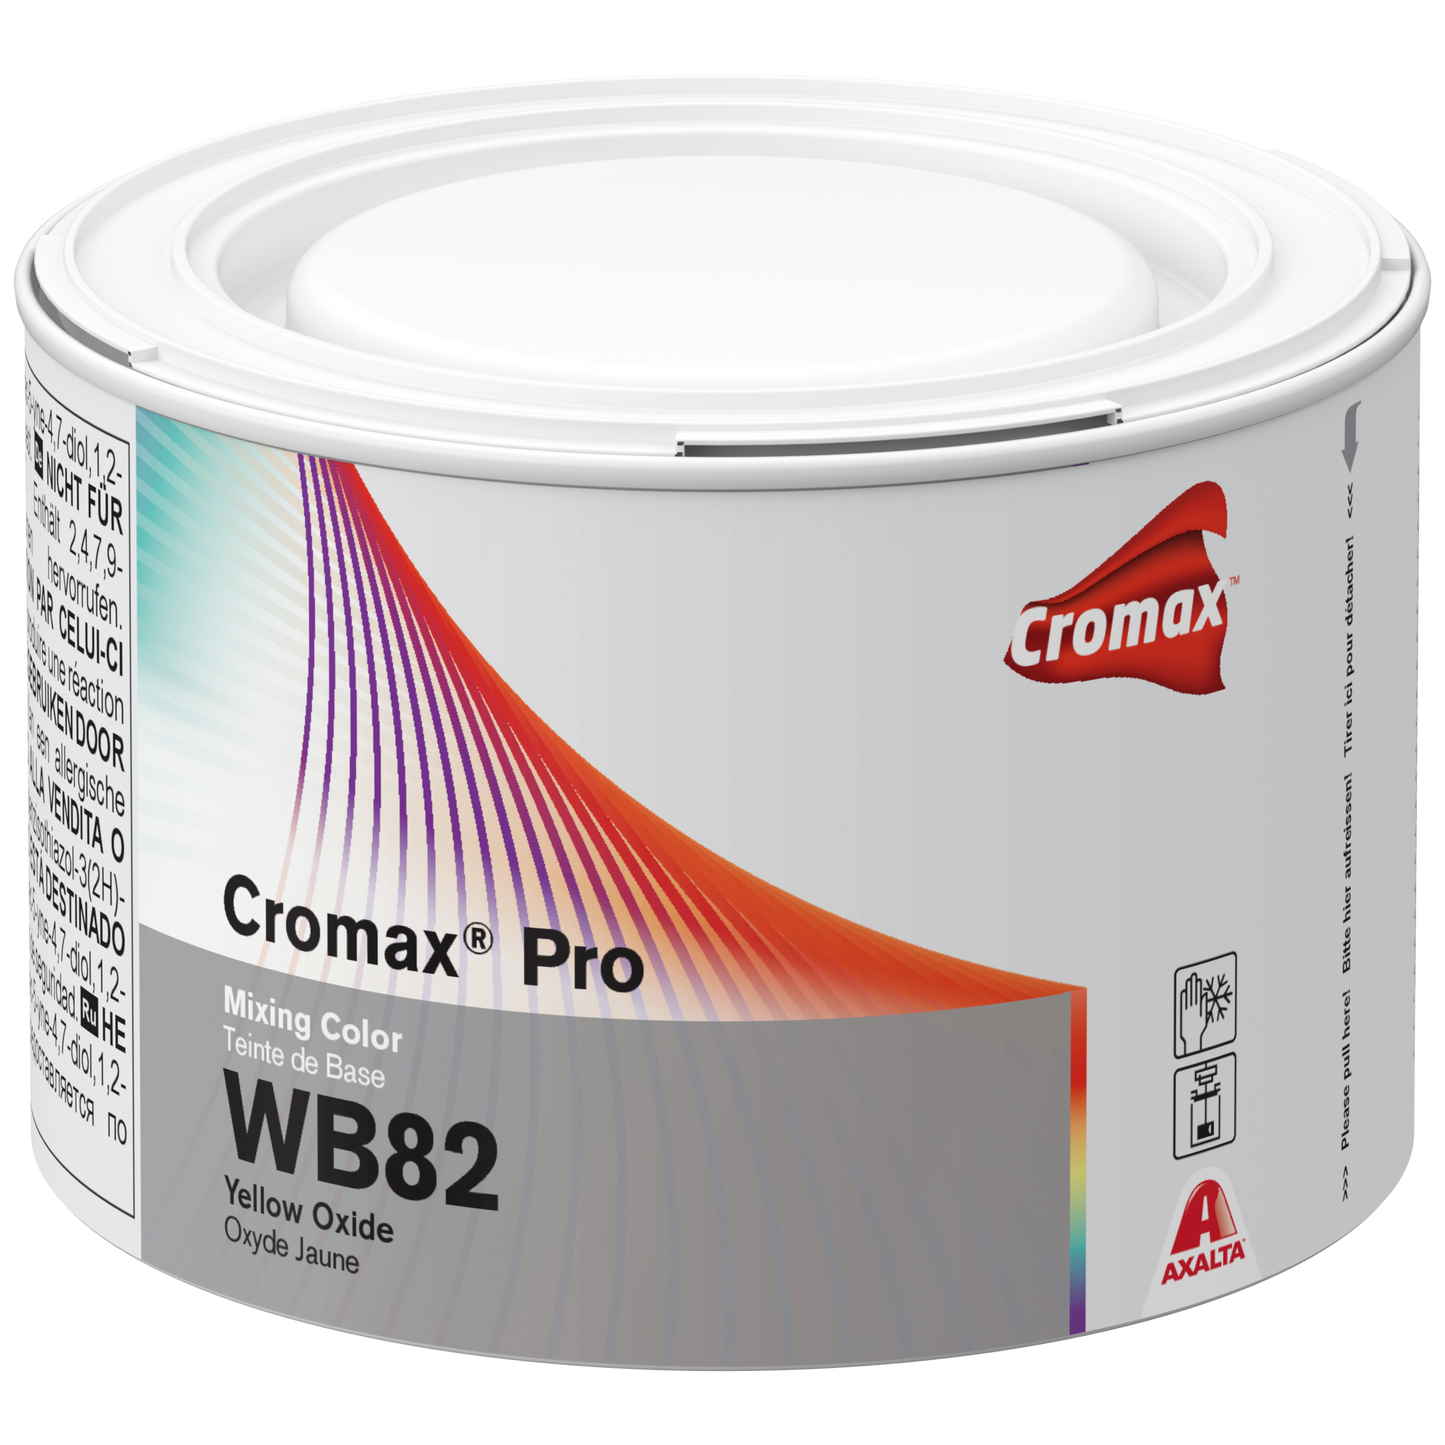 Cromax Pro Mixing Color Yellow Oxide - 0.5 lit